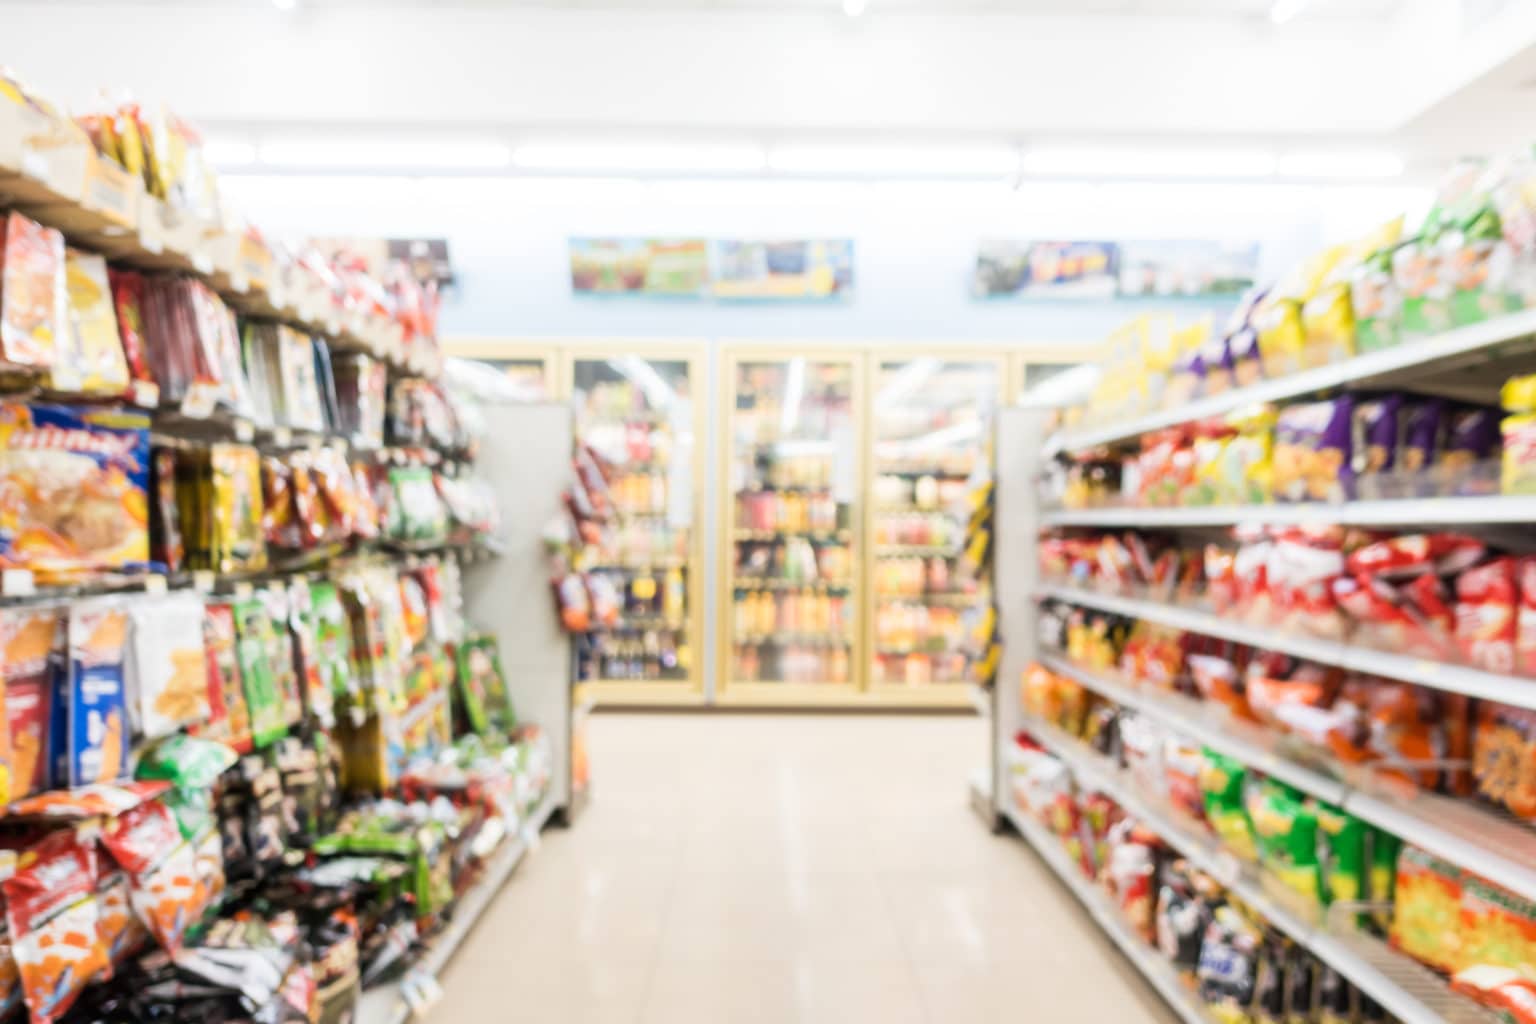 Aisles and shelves filled with various food products in side grocery convenience store.